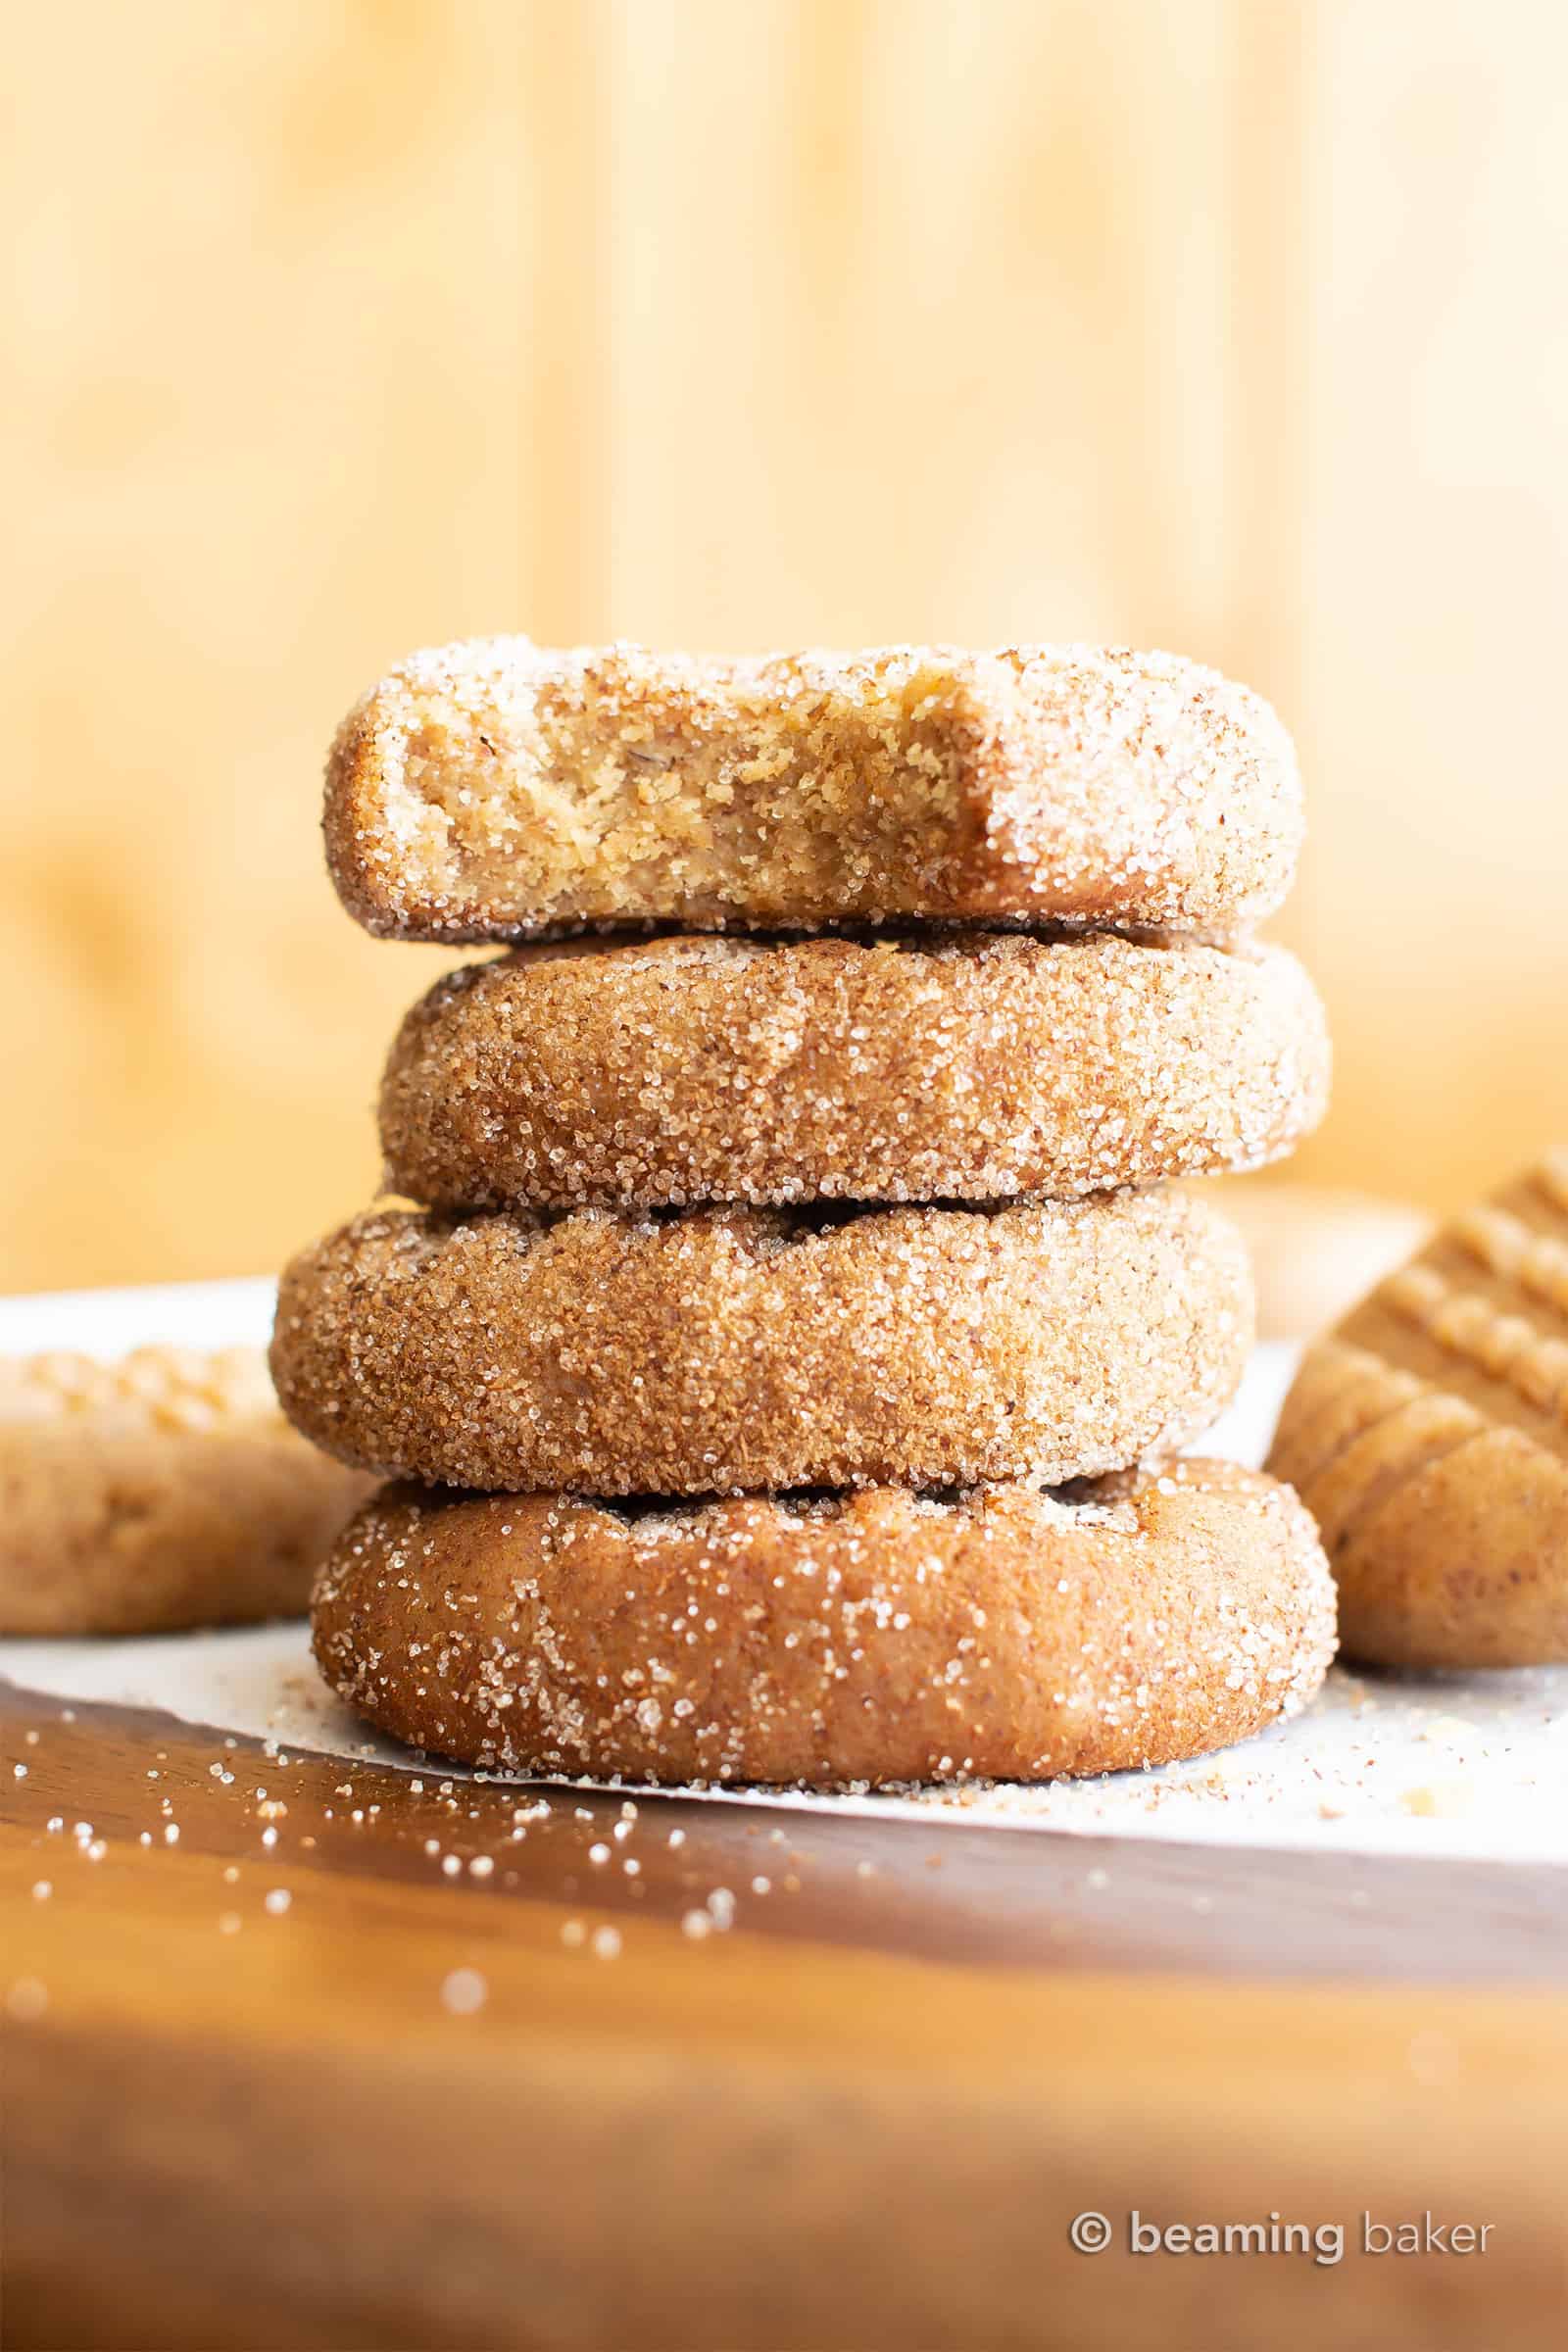 No Bake Snickerdoodle Cookies (V, GF): just 5 ingredients for easy Vegan + Gluten Free snickerdoodle cookies! These chewy, cinnamon-spiced cookies are sweet, Grain-Free, refined sugar-free, Dairy-Free, No Cook. #NoBake #Cookies #Vegan #GlutenFree | Recipe at BeamingBaker.com